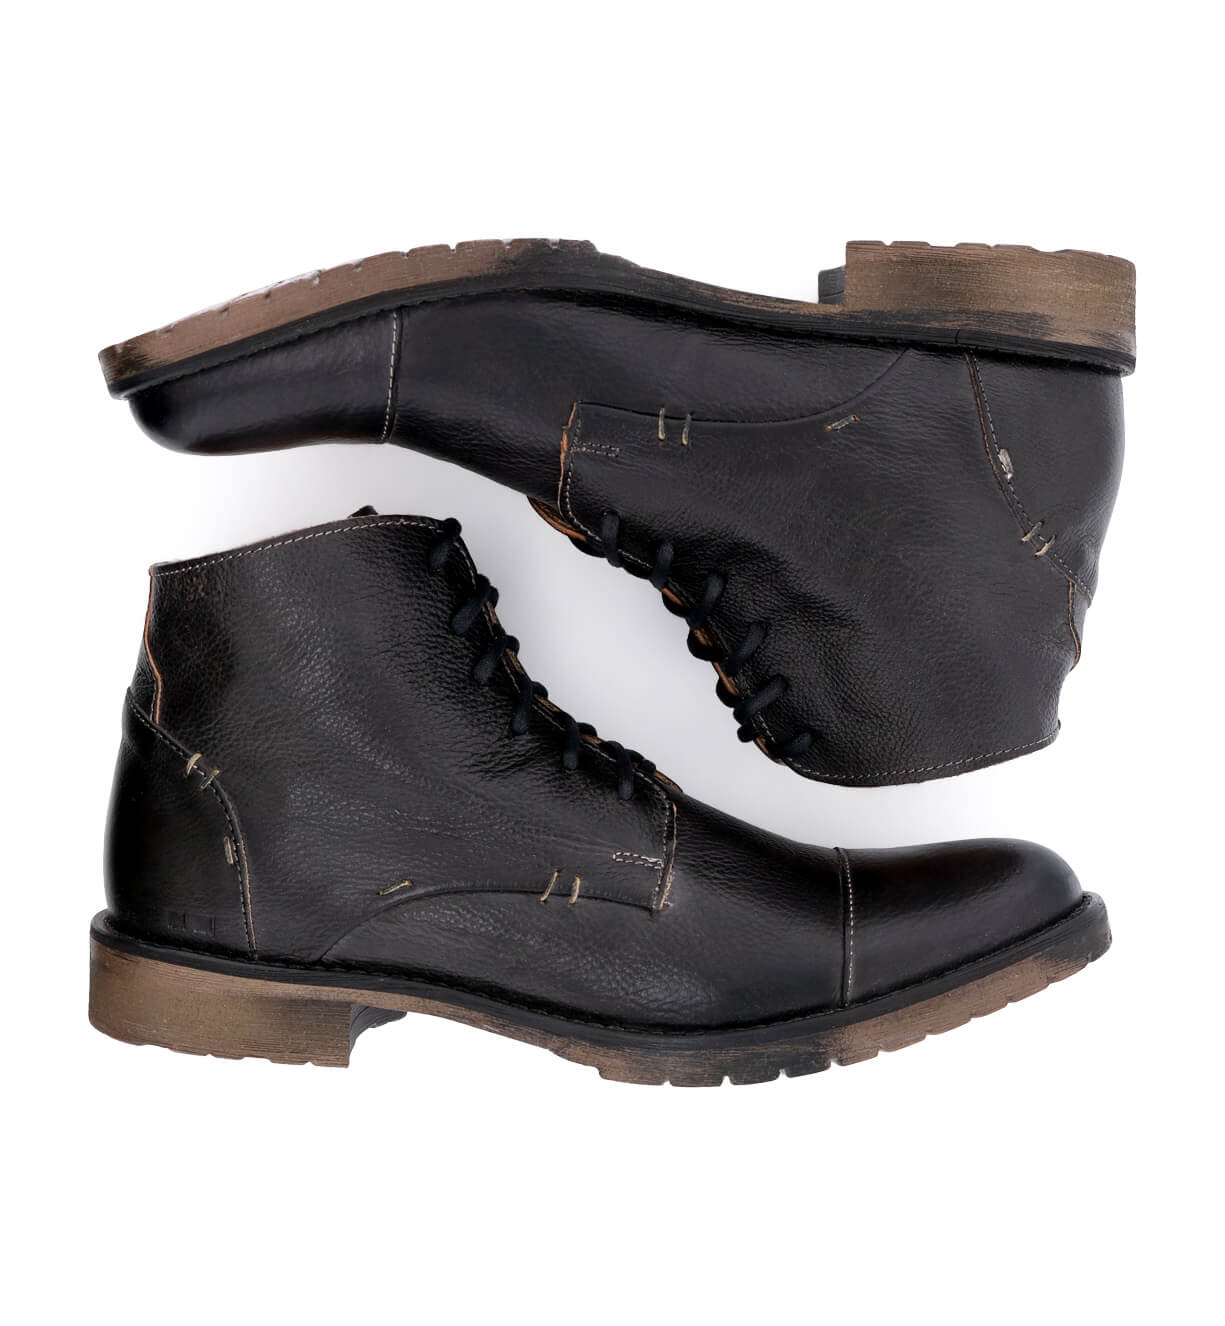 A pair of Bed Stu black leather boots on a white background.